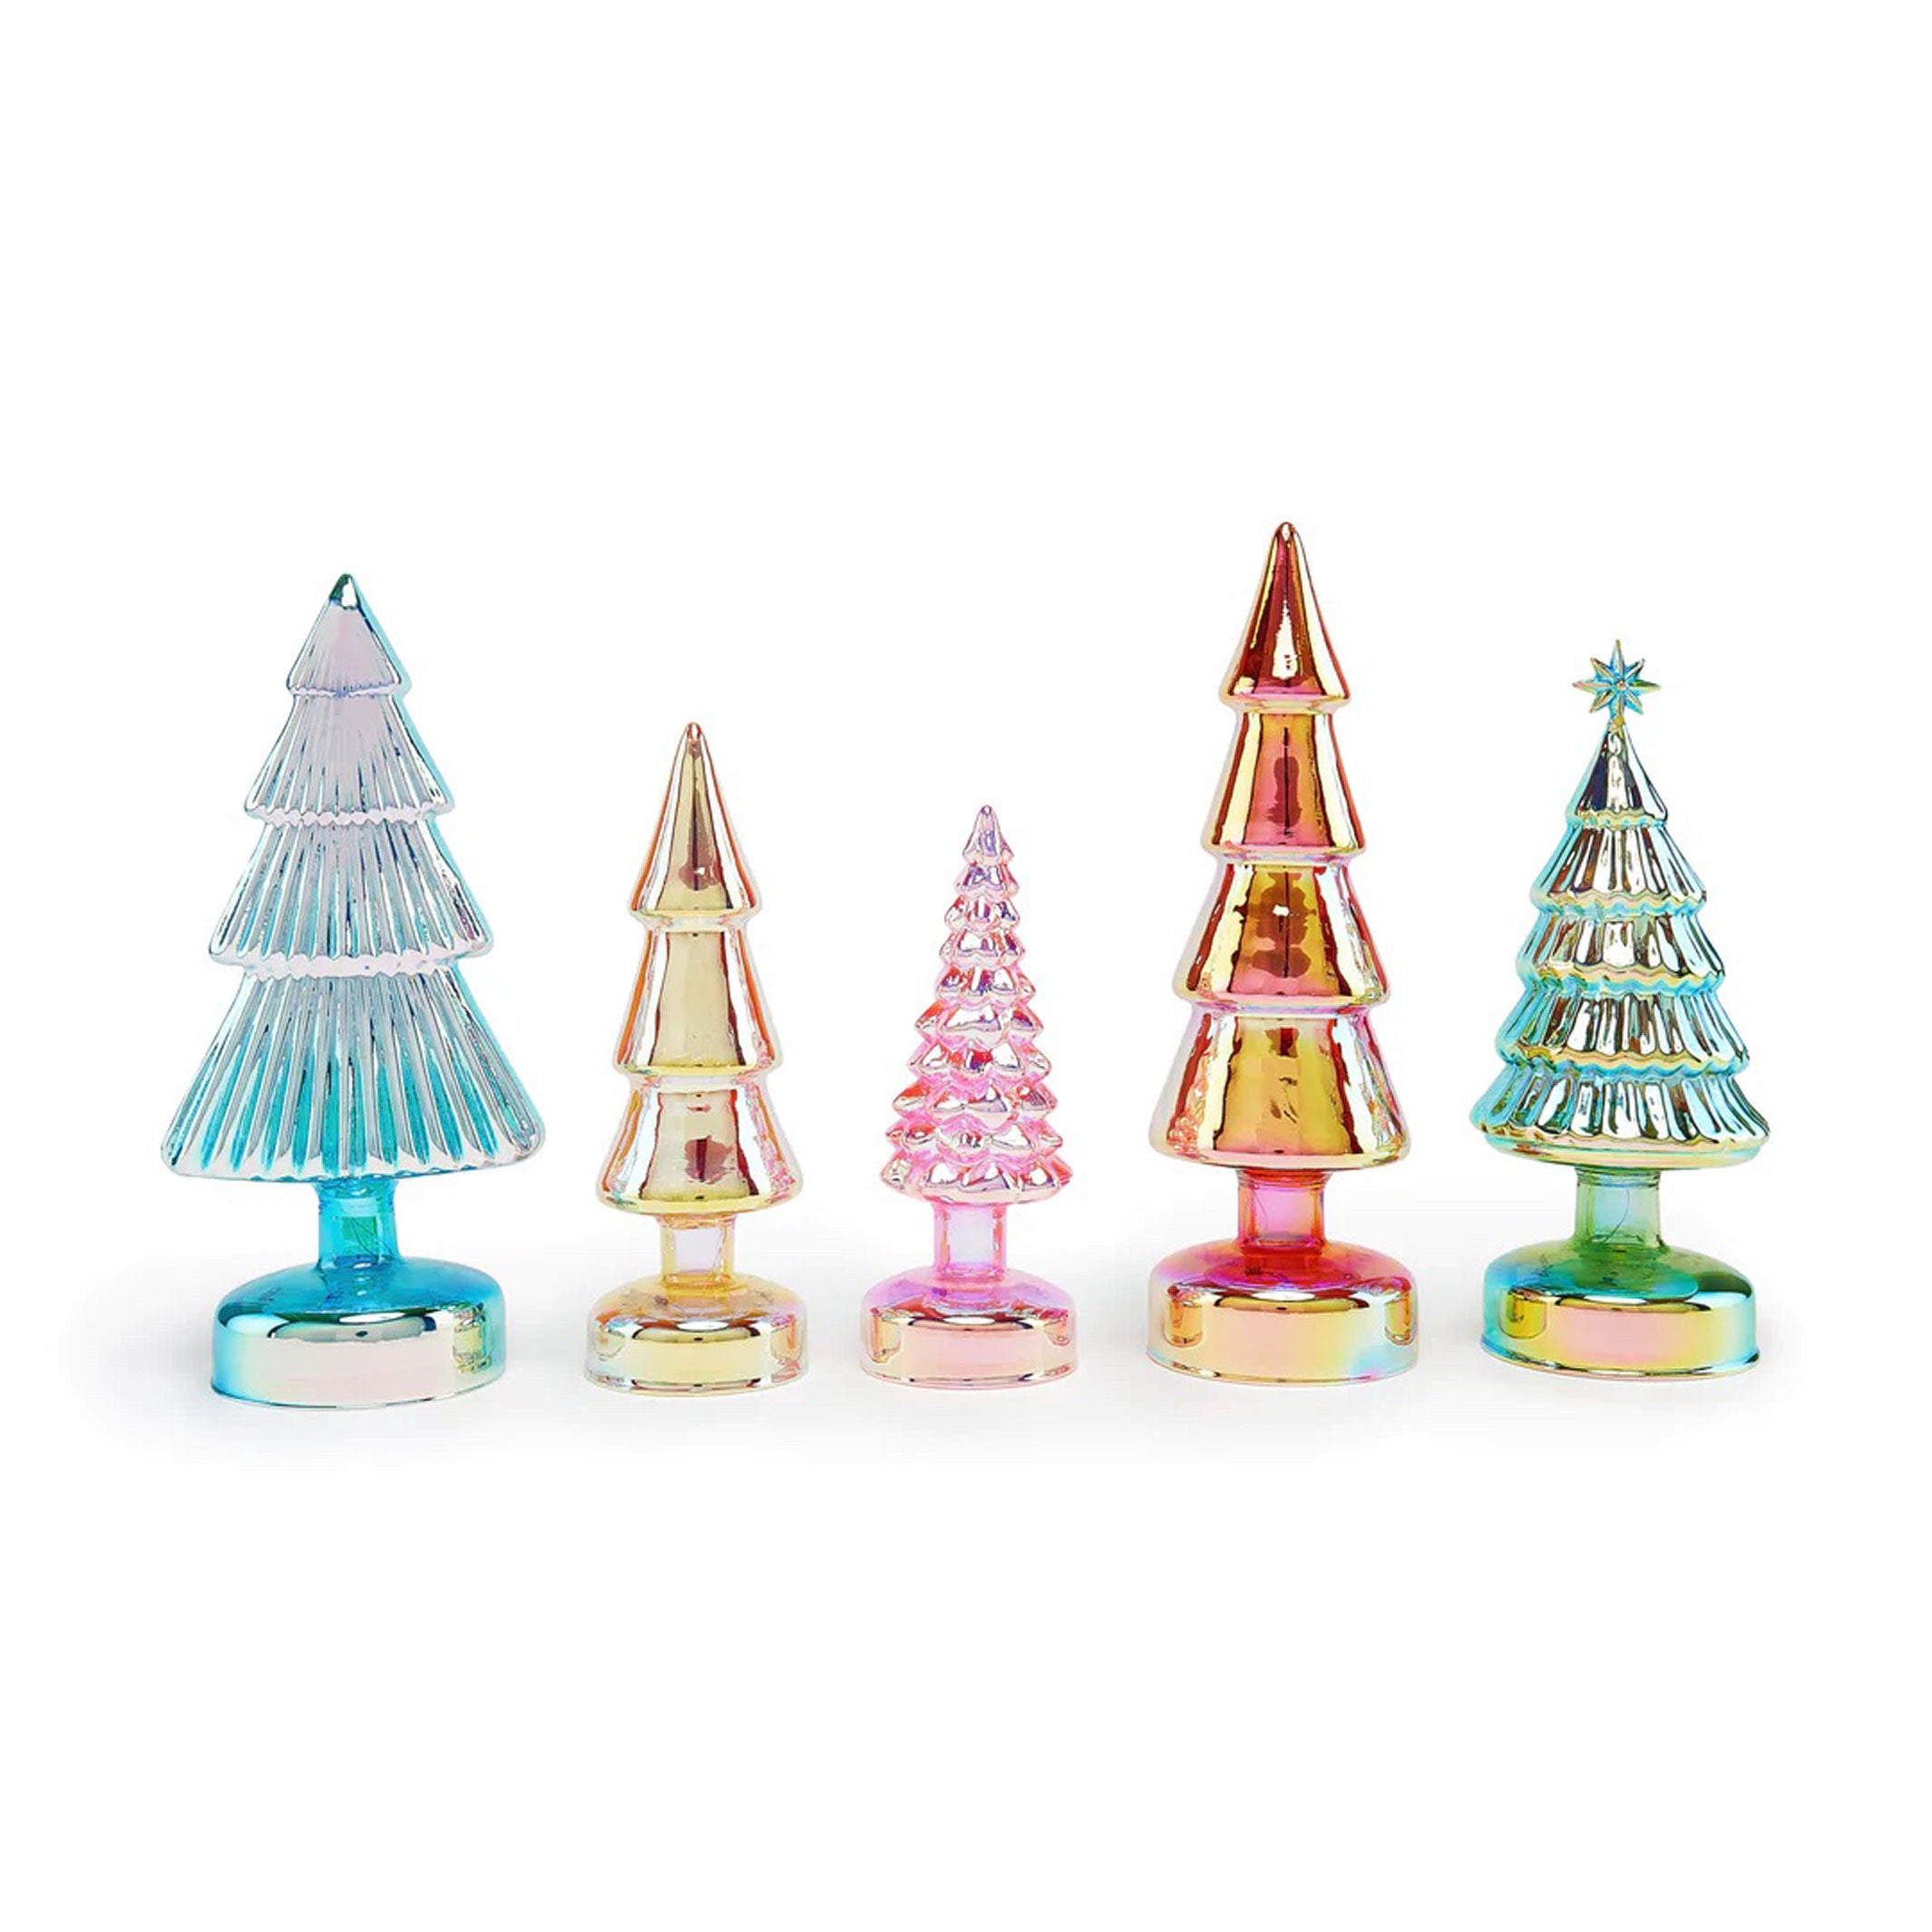 Small Colorful LED GLASS LIGHTED TREES | LED lighted glass TREES | Set of 5 | MoMA